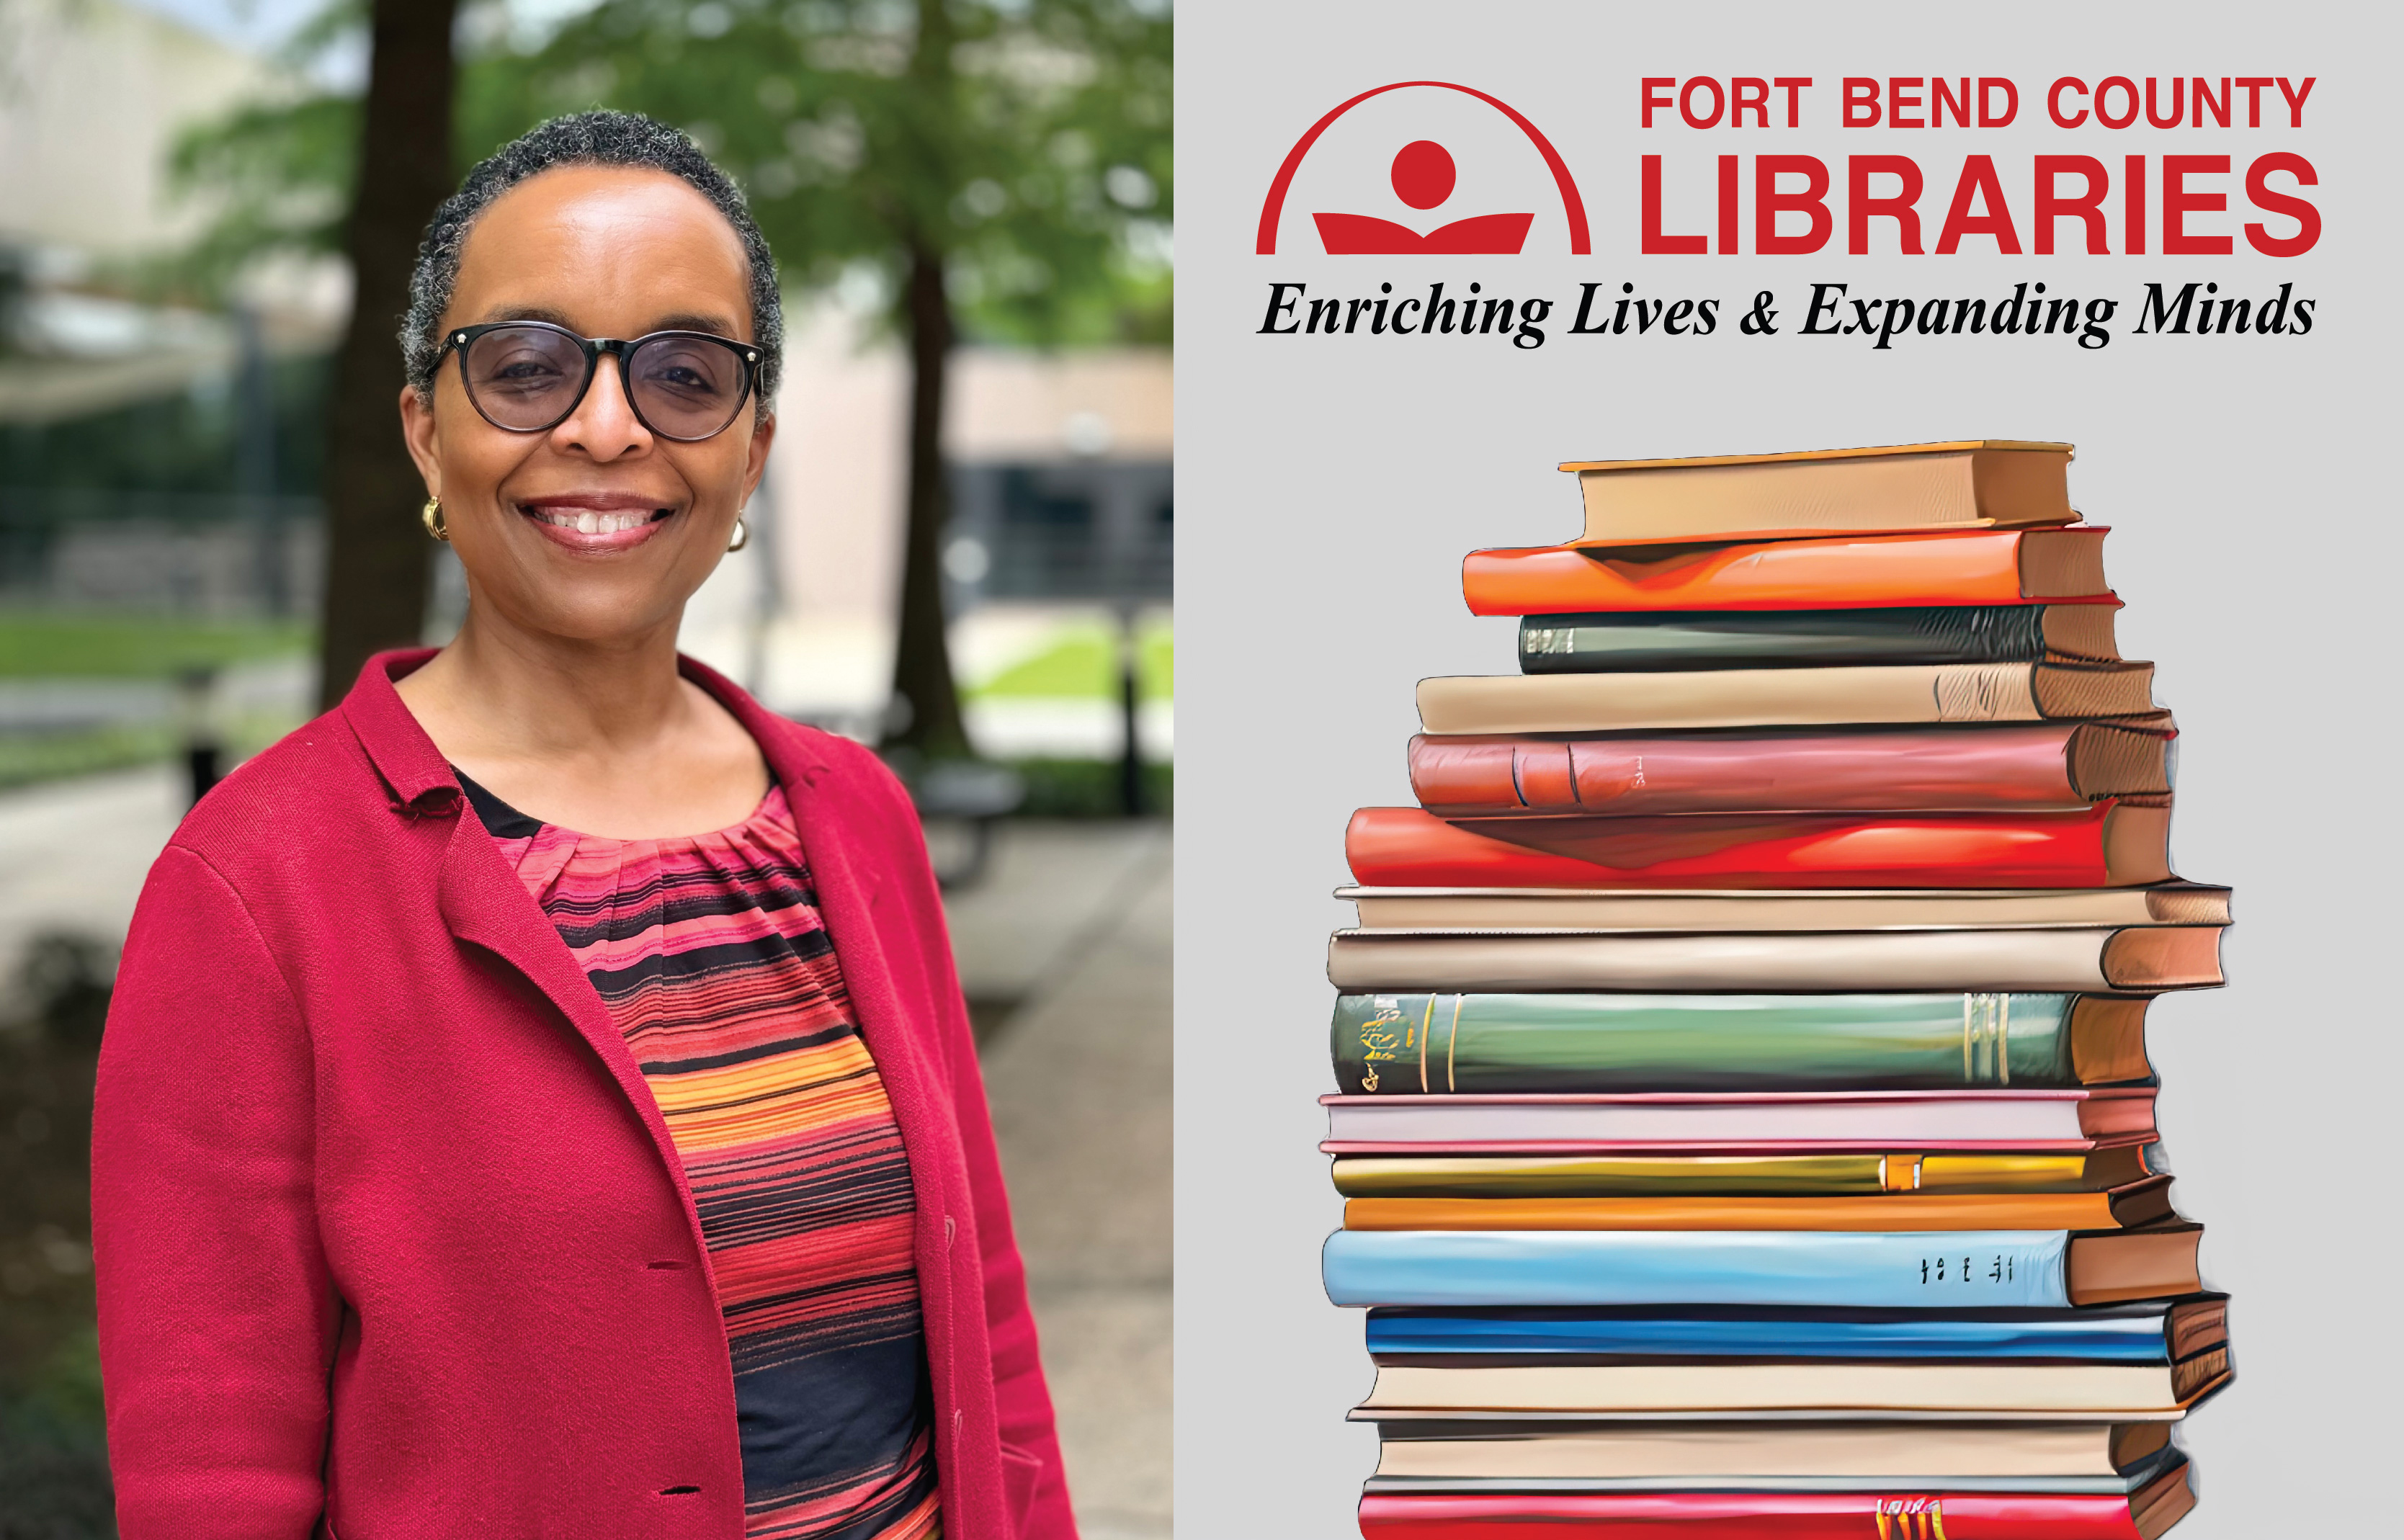 New Interim Director Appointed for Fort Bend County Library System